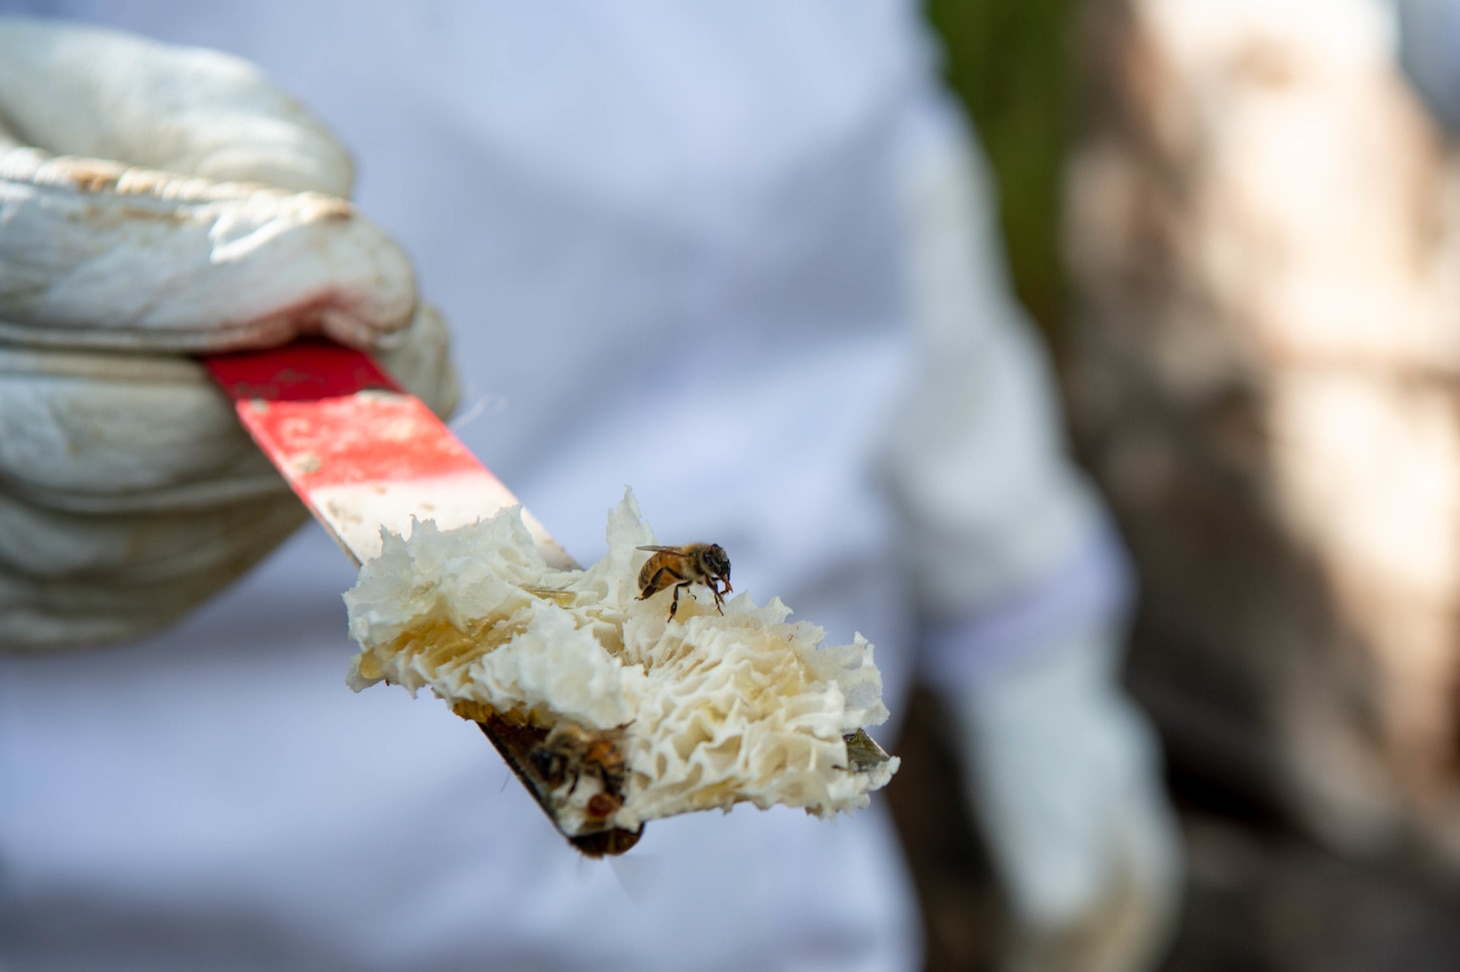 A bee sits on freshly scraped beeswax held by Alanna Lundstrom-Huser during a volunteer event at Pacific Missile Range Facility (PMRF), Barking Sands. PMRF is the world’s largest instrumented multi-environment range capable of supporting surface, subsurface, air and space operations simultaneously.